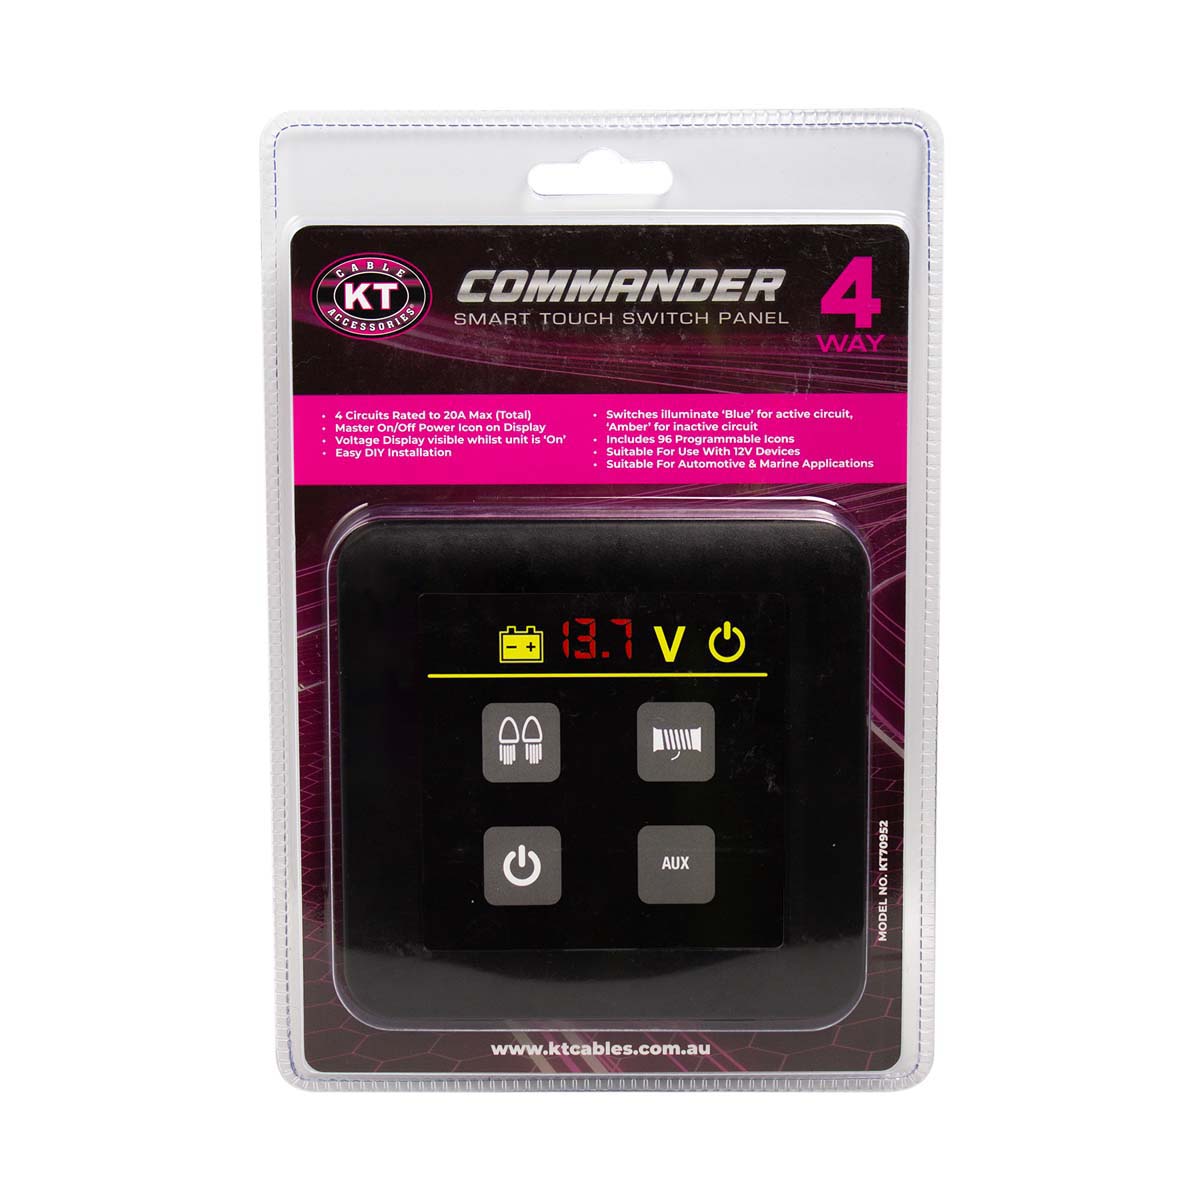 KT Cables Commander 4 Way Smart-Touch Switch Panel